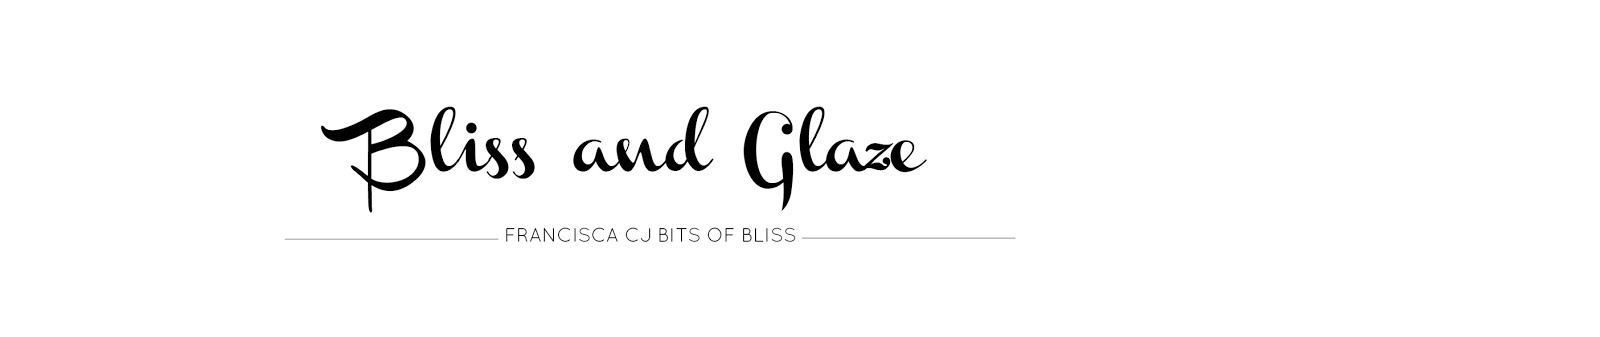 Bliss and Glaze